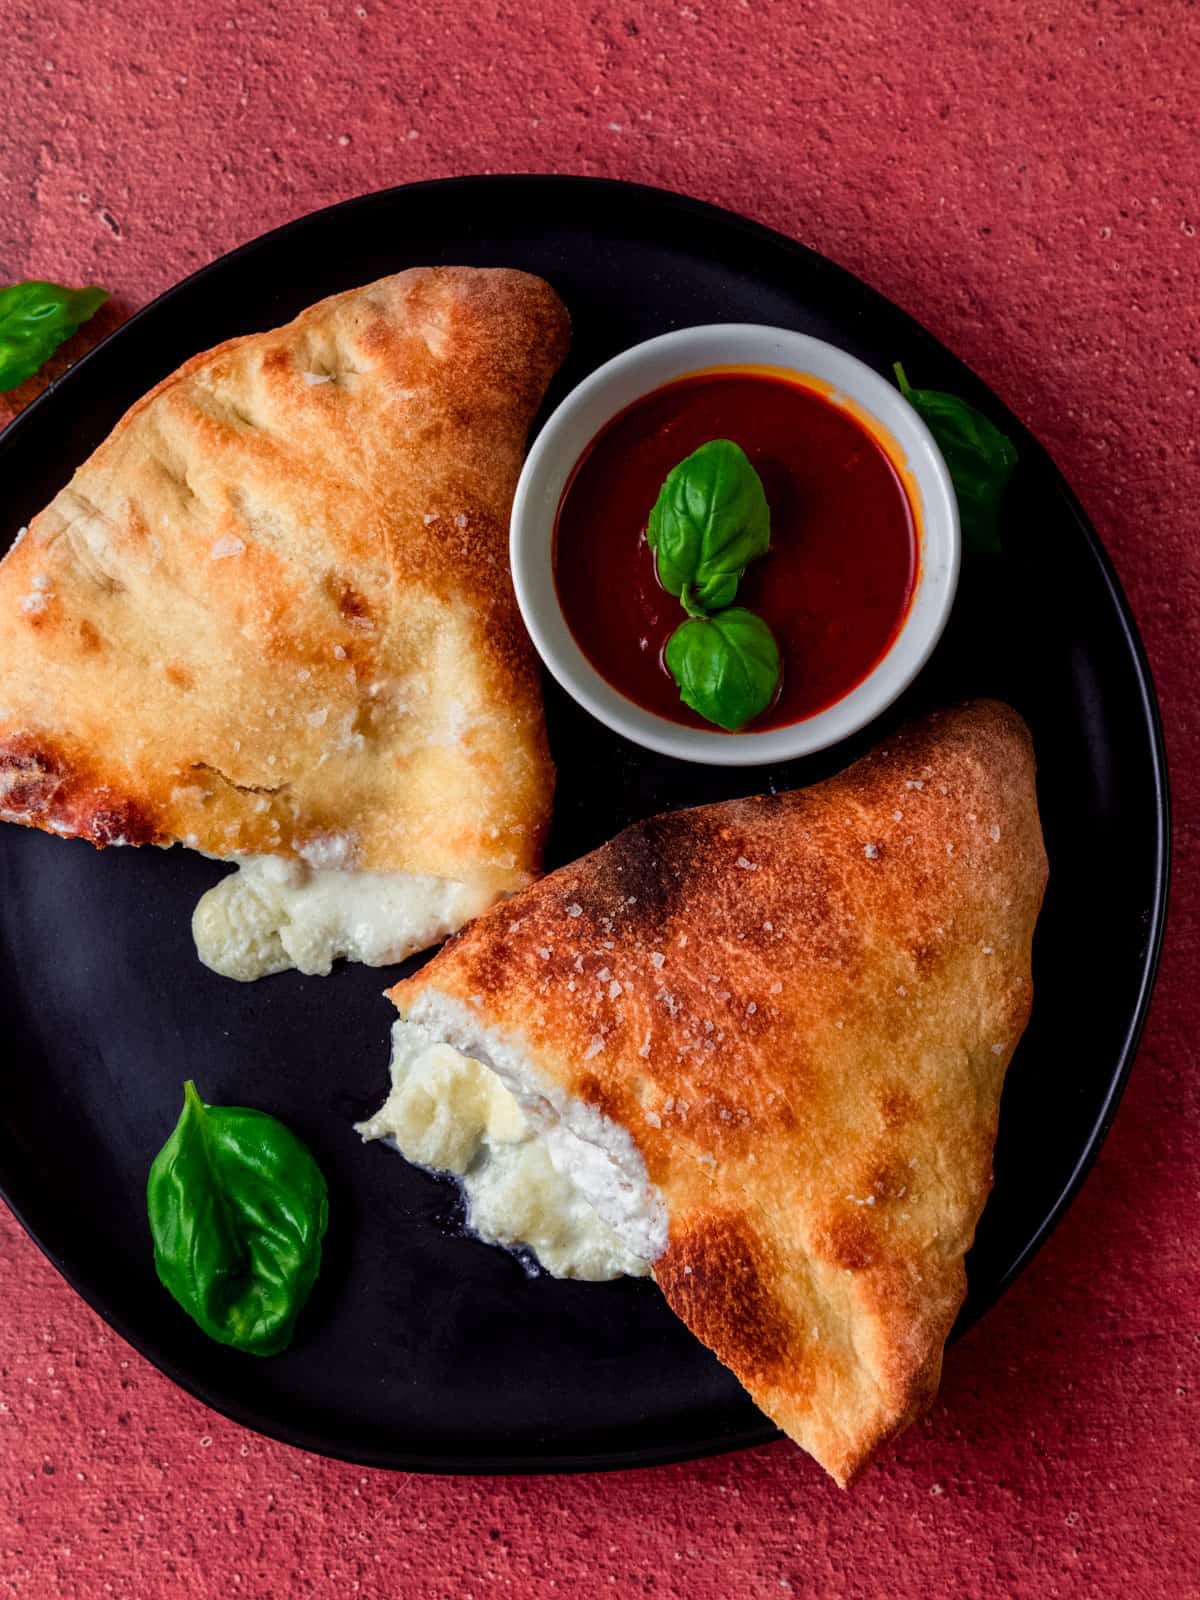 Four cheese calzone with a perfectly golden crust that is served alongside simple marinara sauce for dipping.